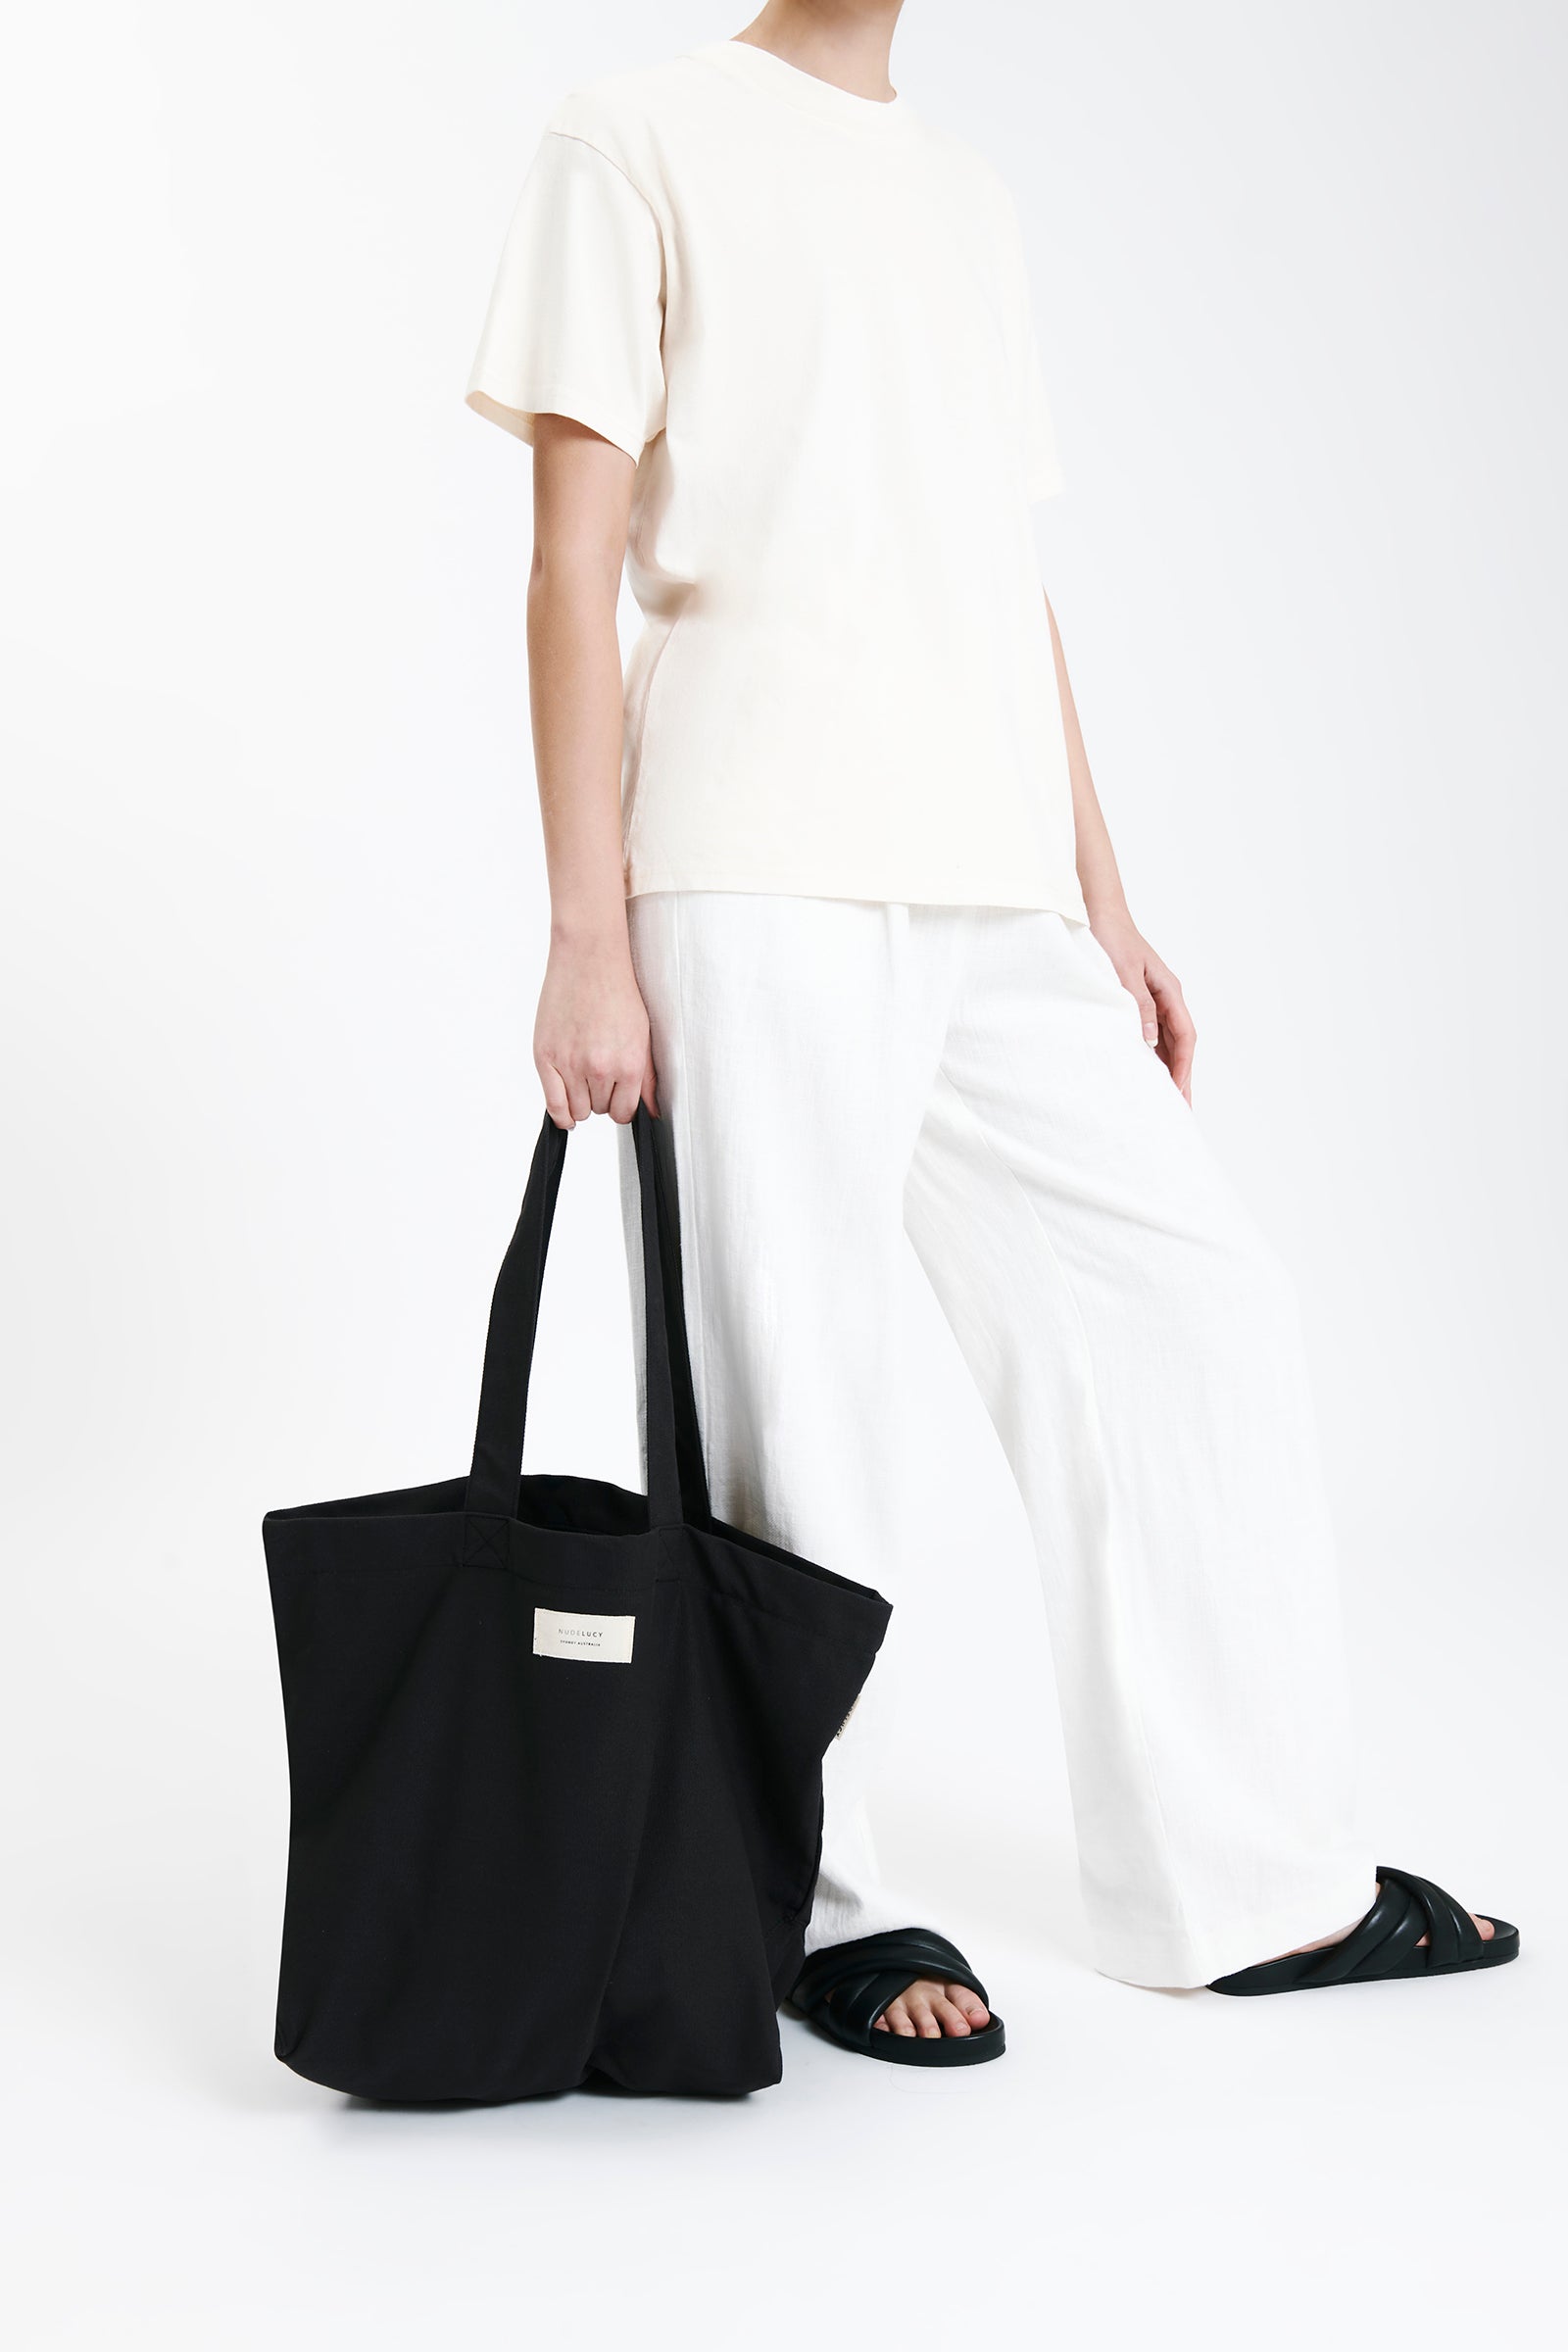 Nude Lucy Nude Travel Tote In A Dark Grey In A Brown Coal Colour 